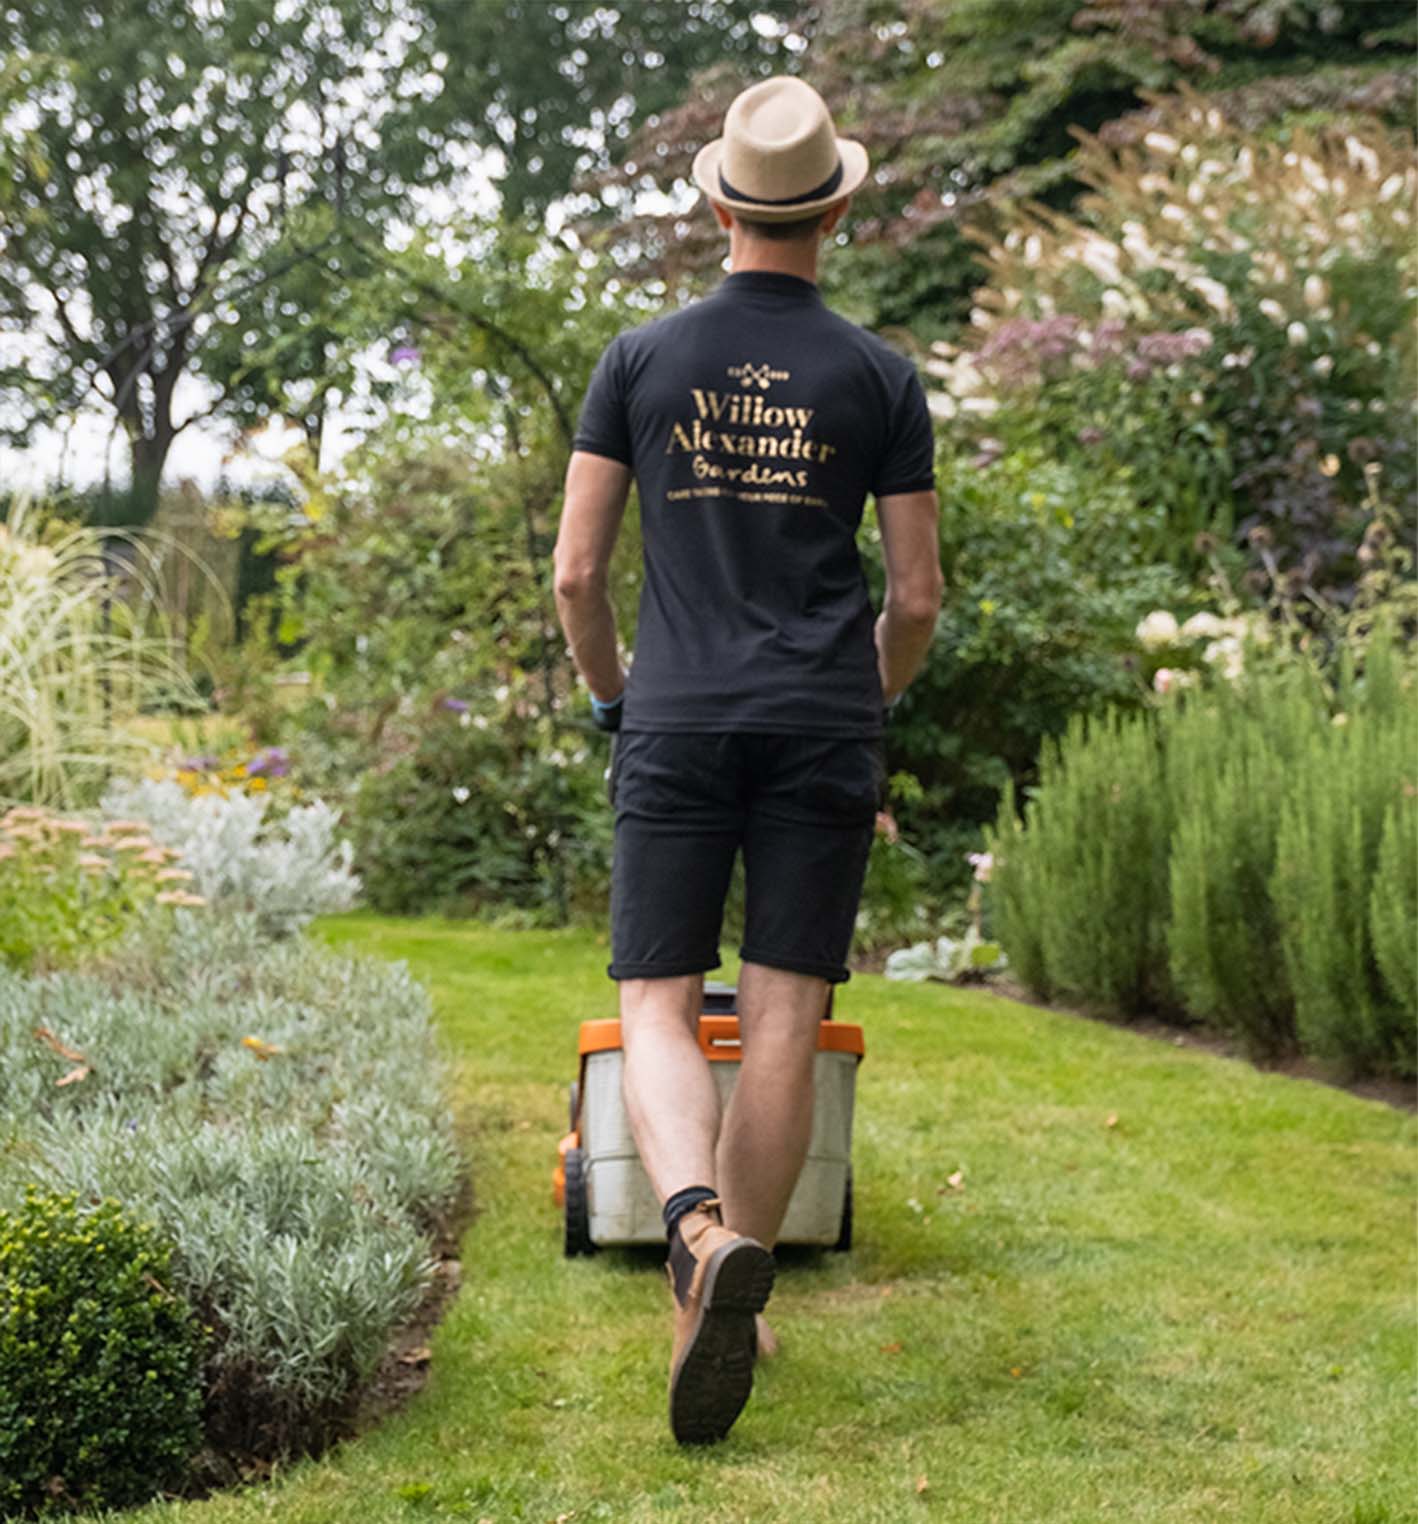 One of the Willow team mowing a garden